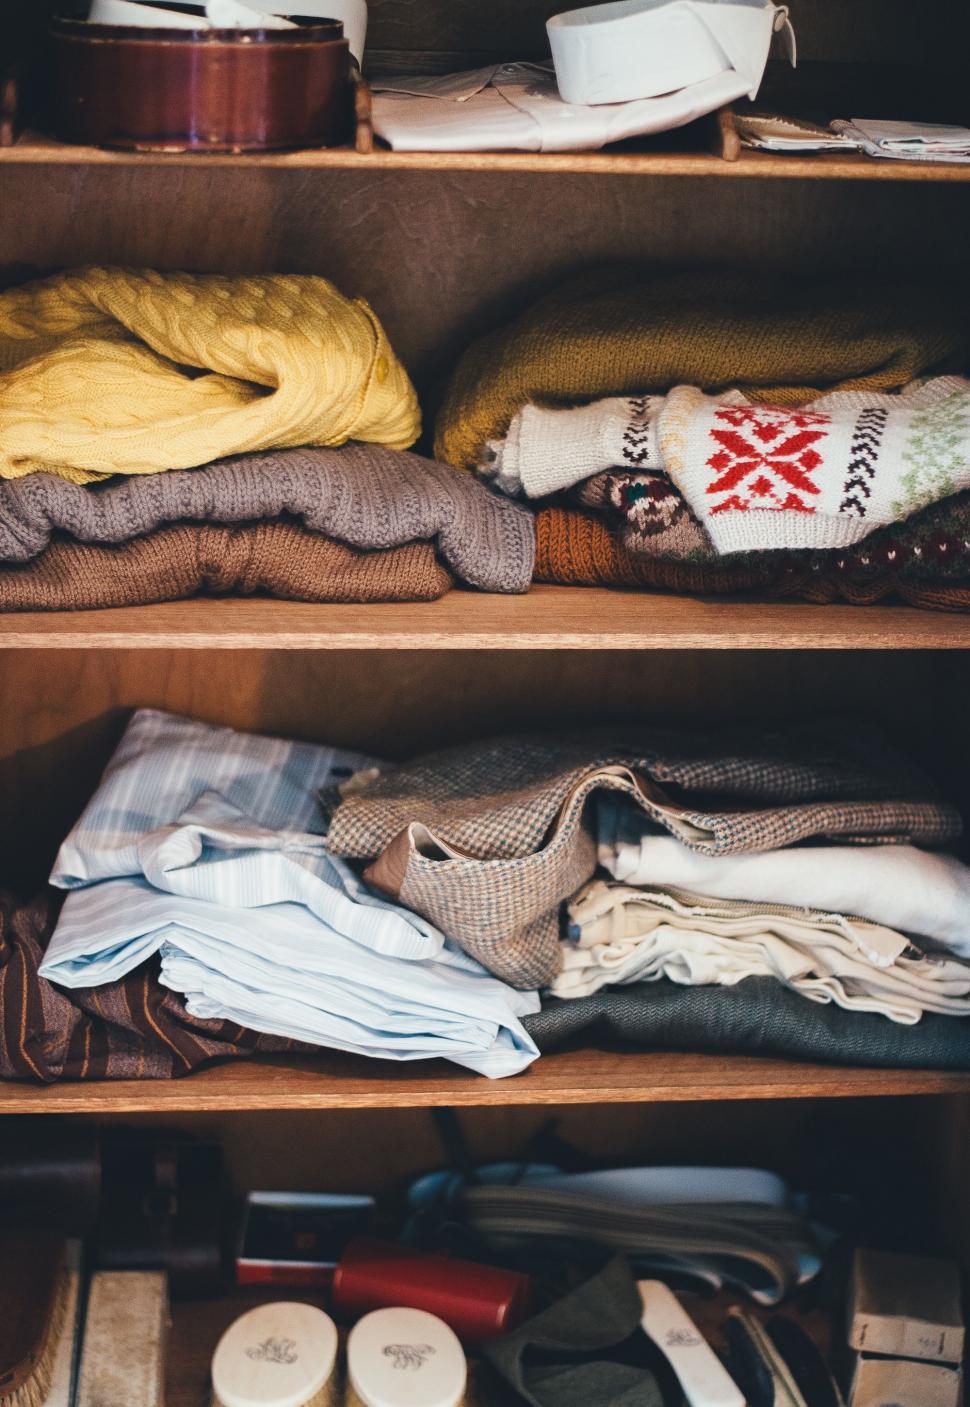 Free Image of Wooden Shelf Filled With Clothes 